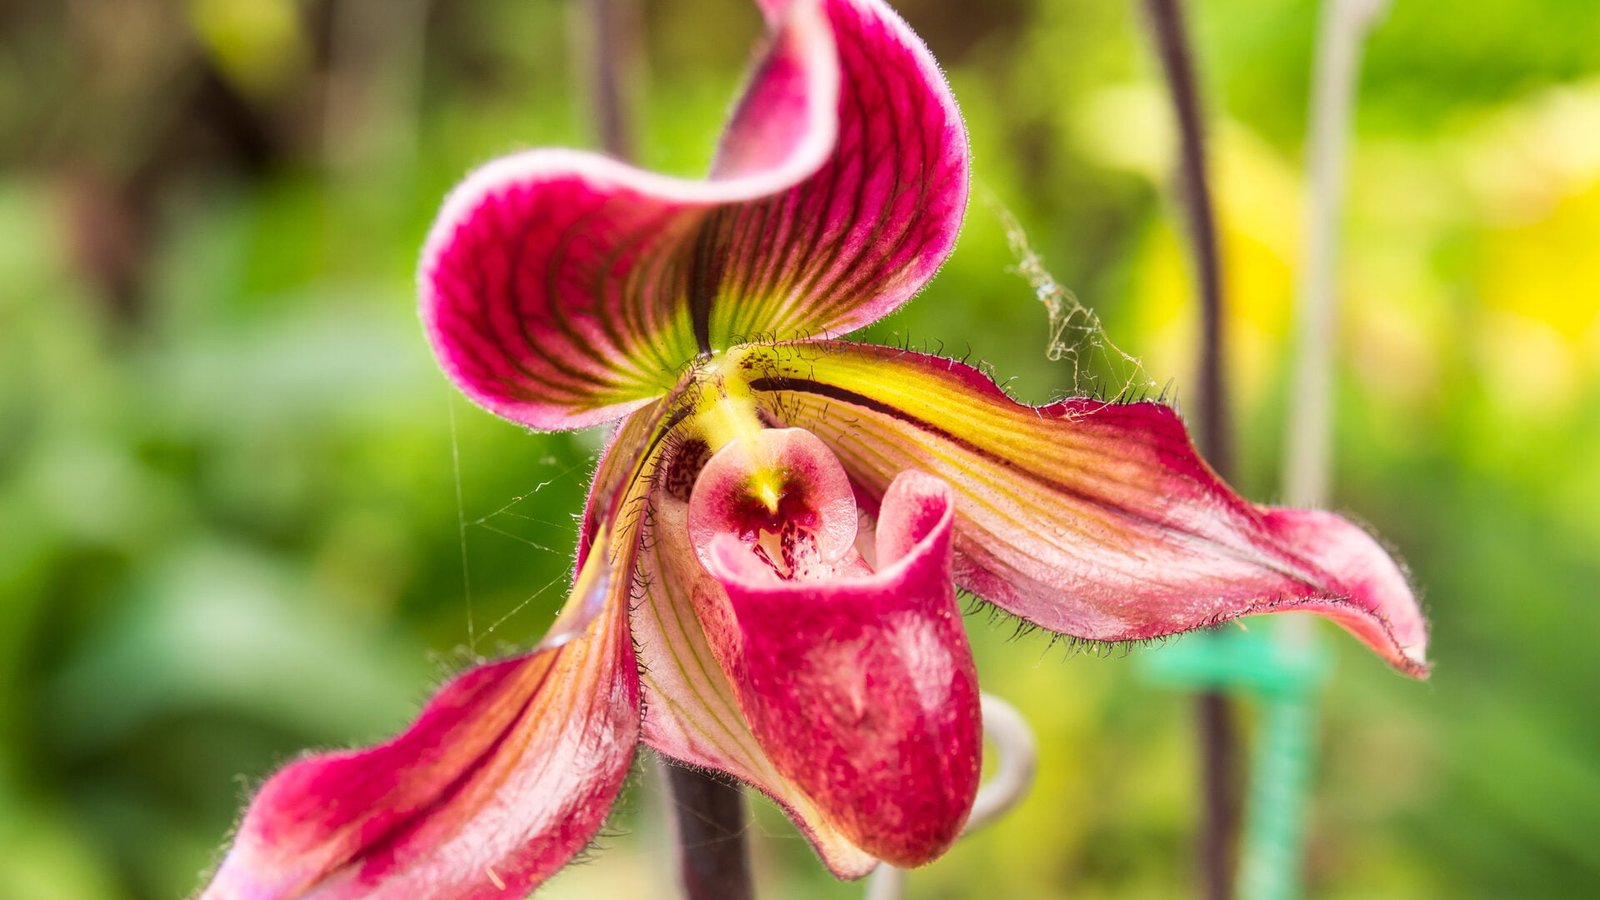 A red and pink orchid flower in a garden.